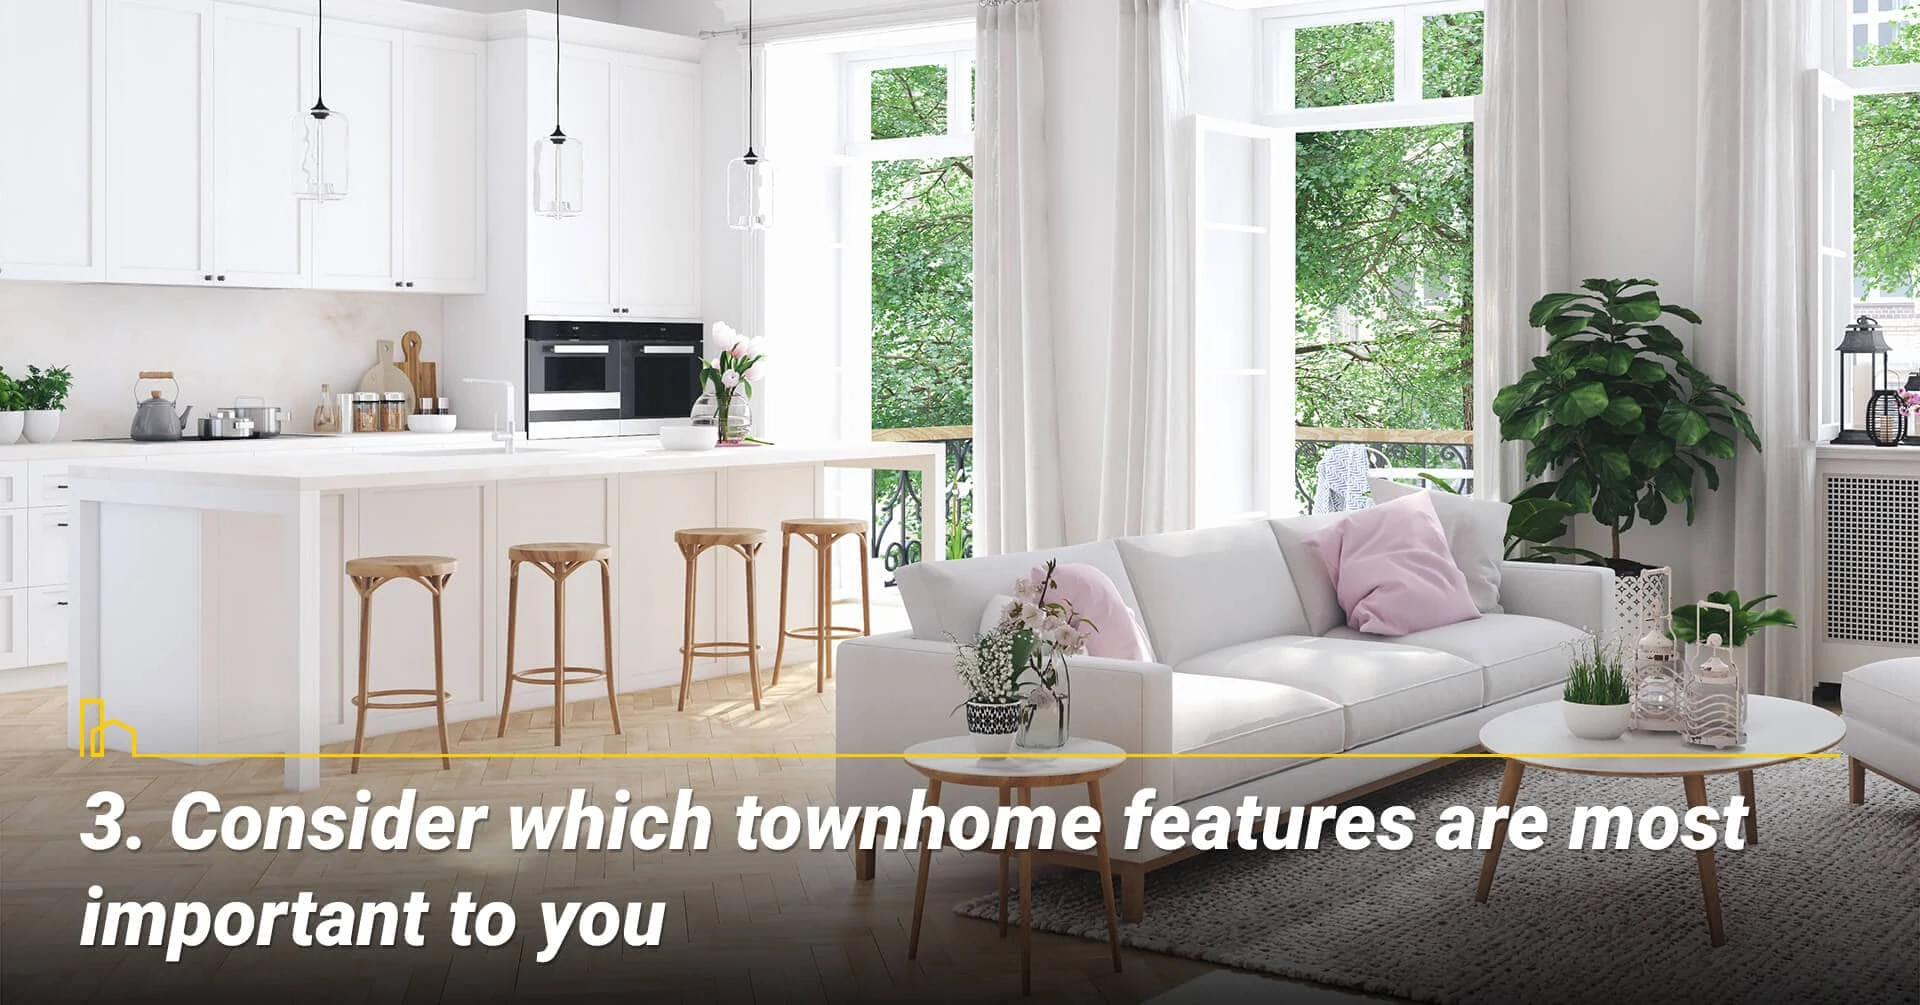 Consider which townhome features are most important to you, know what you want in a townhome